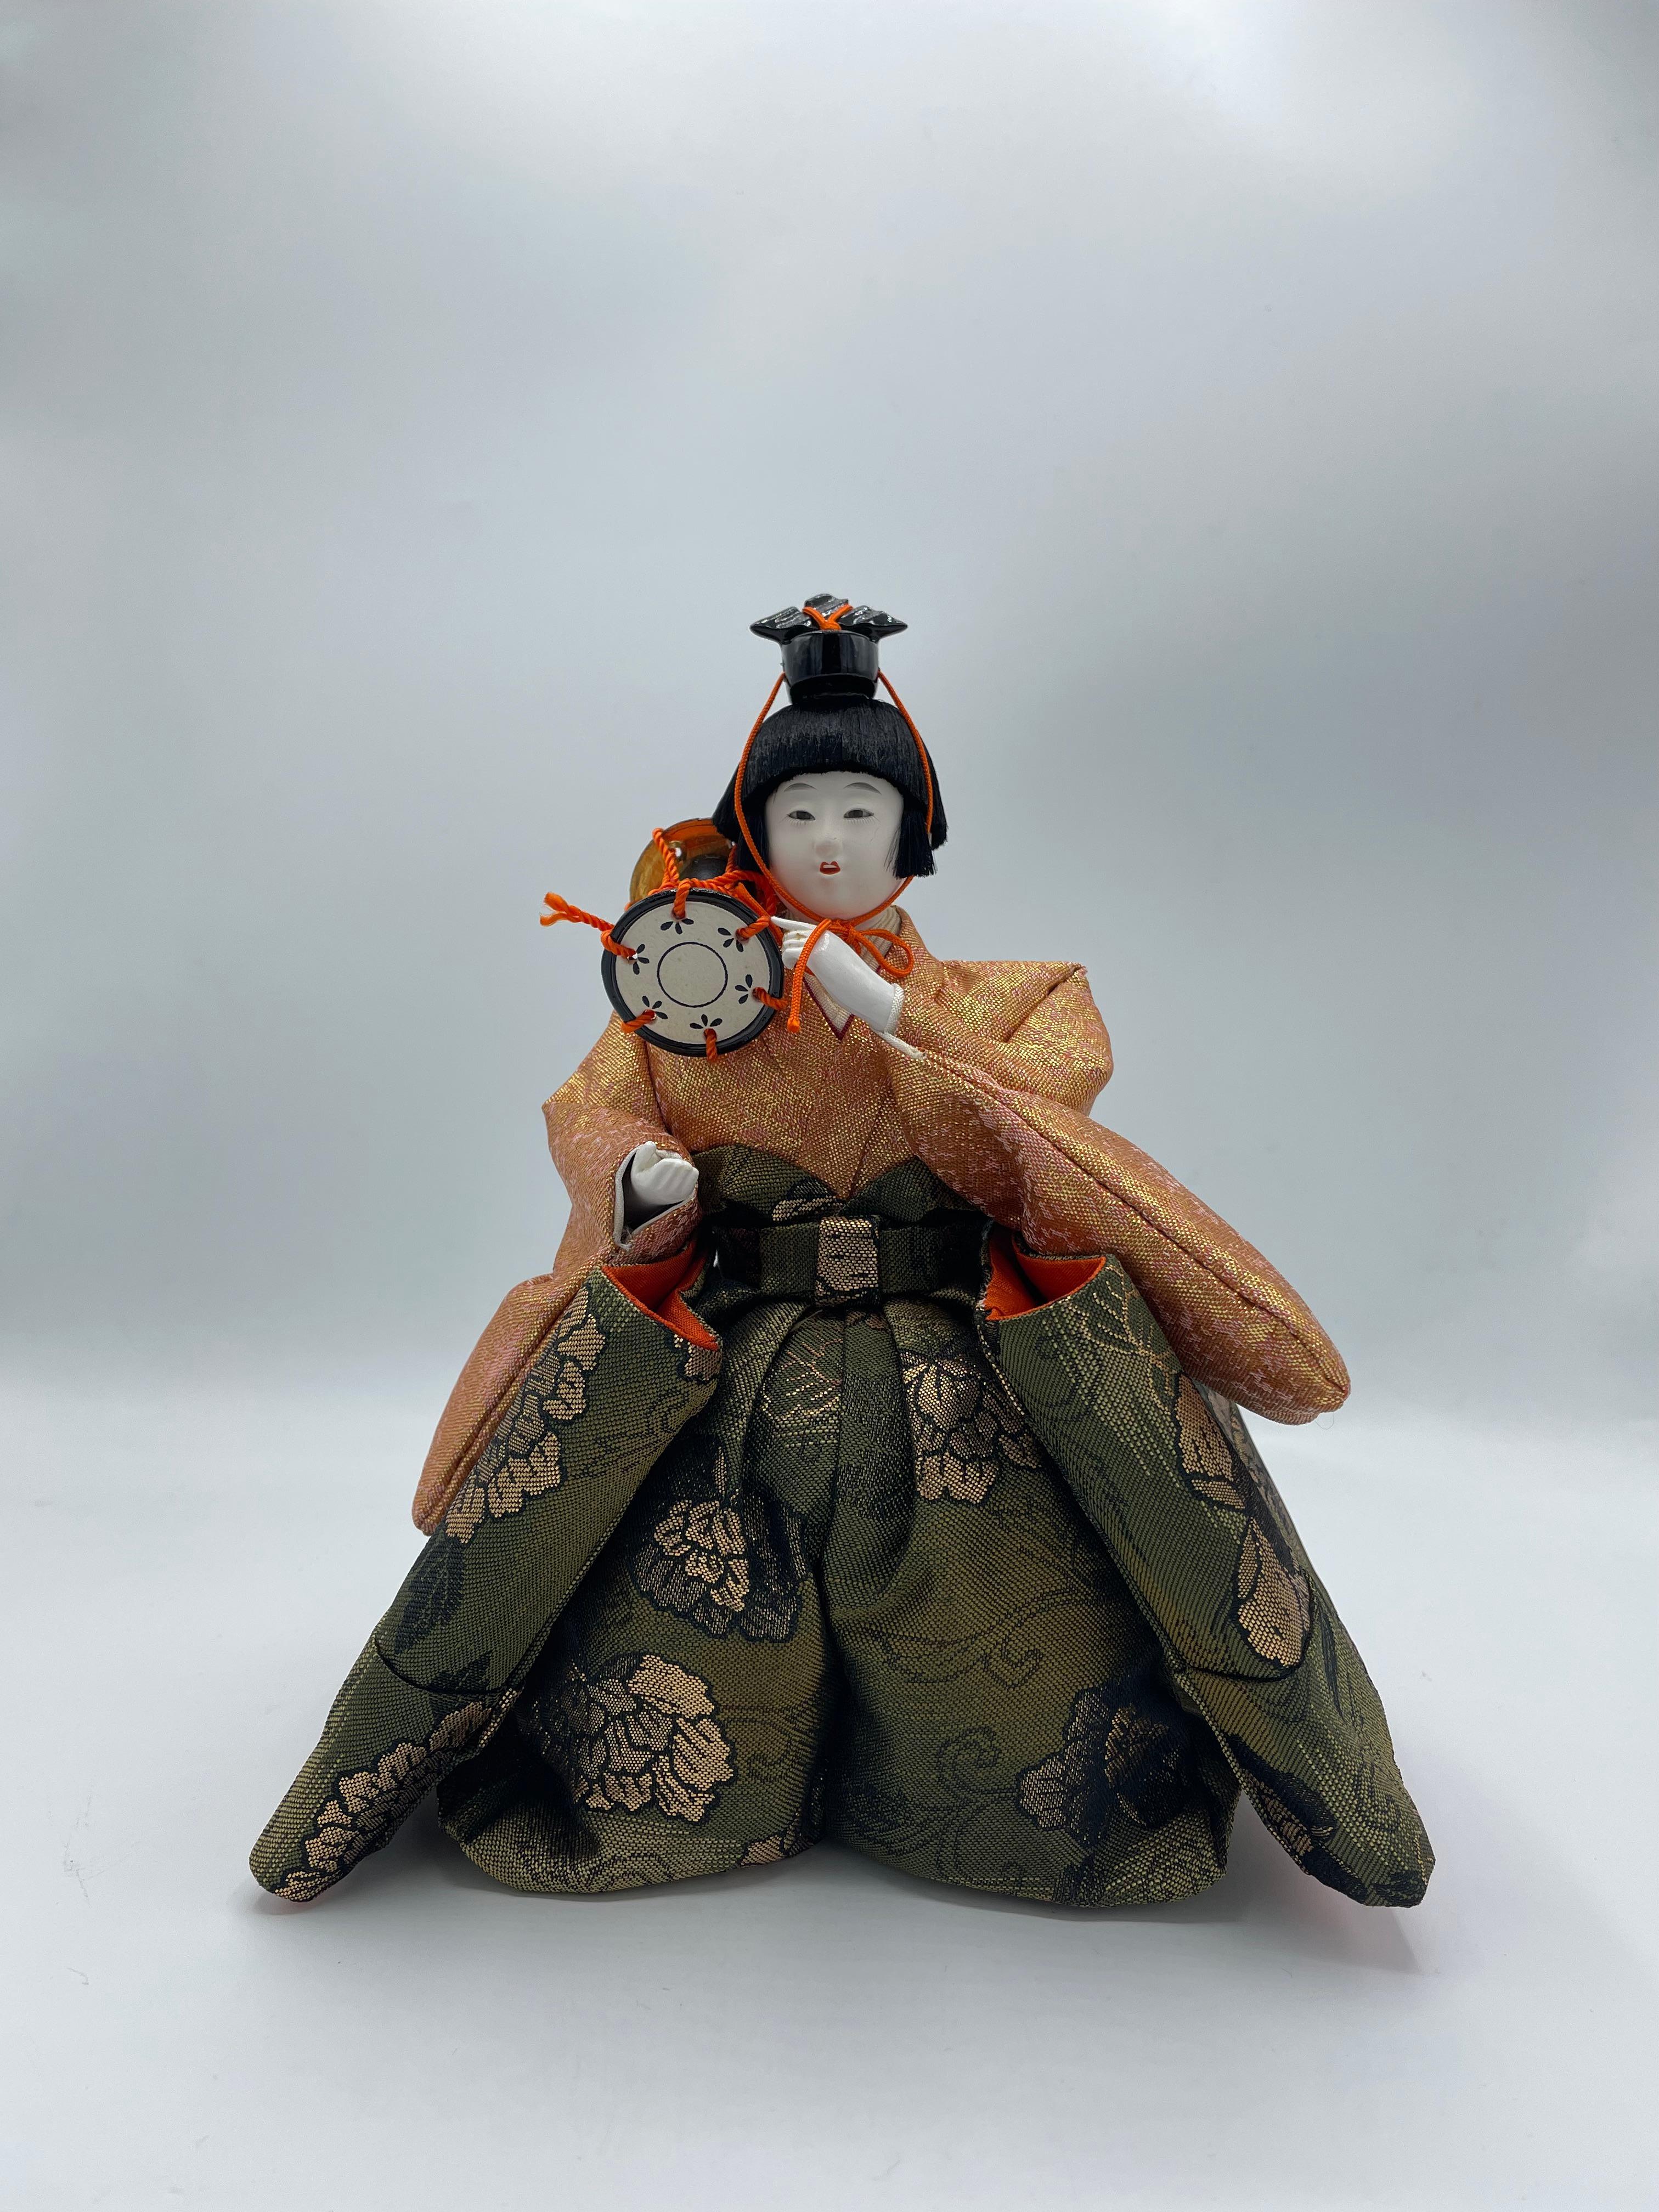 This is a doll which we use for Hinamatsuri day. This person is one of Goninbayashi.
This person has a Drum. This doll was made with plastic, cotton, silk. This doll was made around 1980s in Showa era. 

*
Hinamatsuri :
Hinamatsuri, also called